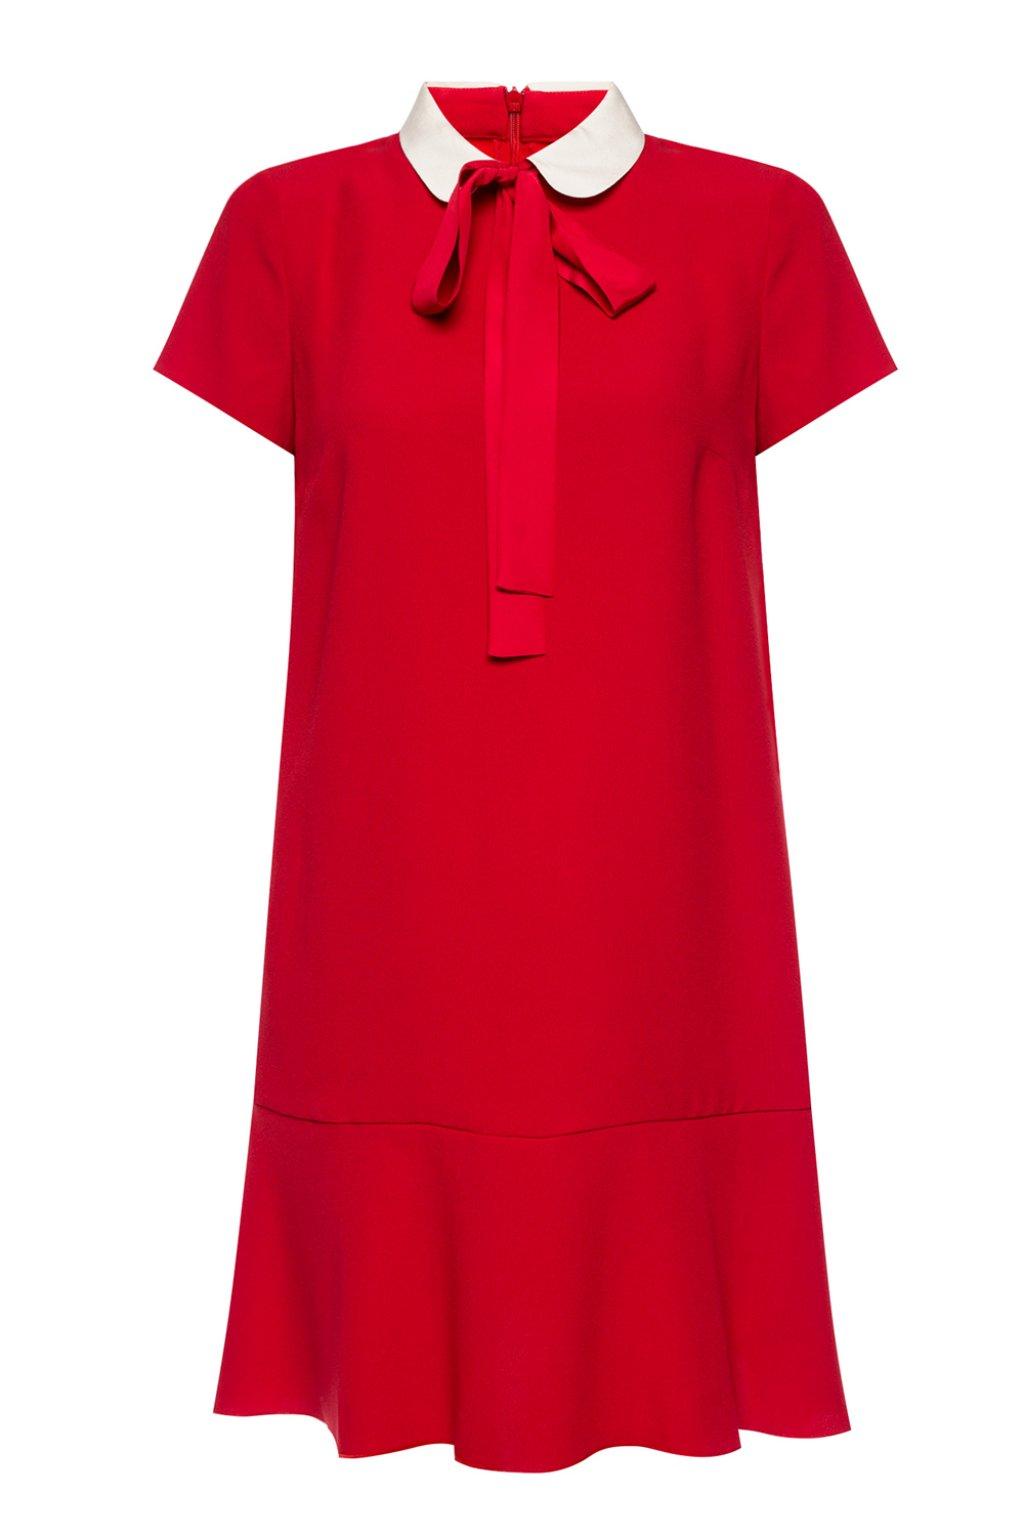 RED Valentino Synthetic Dress With Collar in Red - Lyst